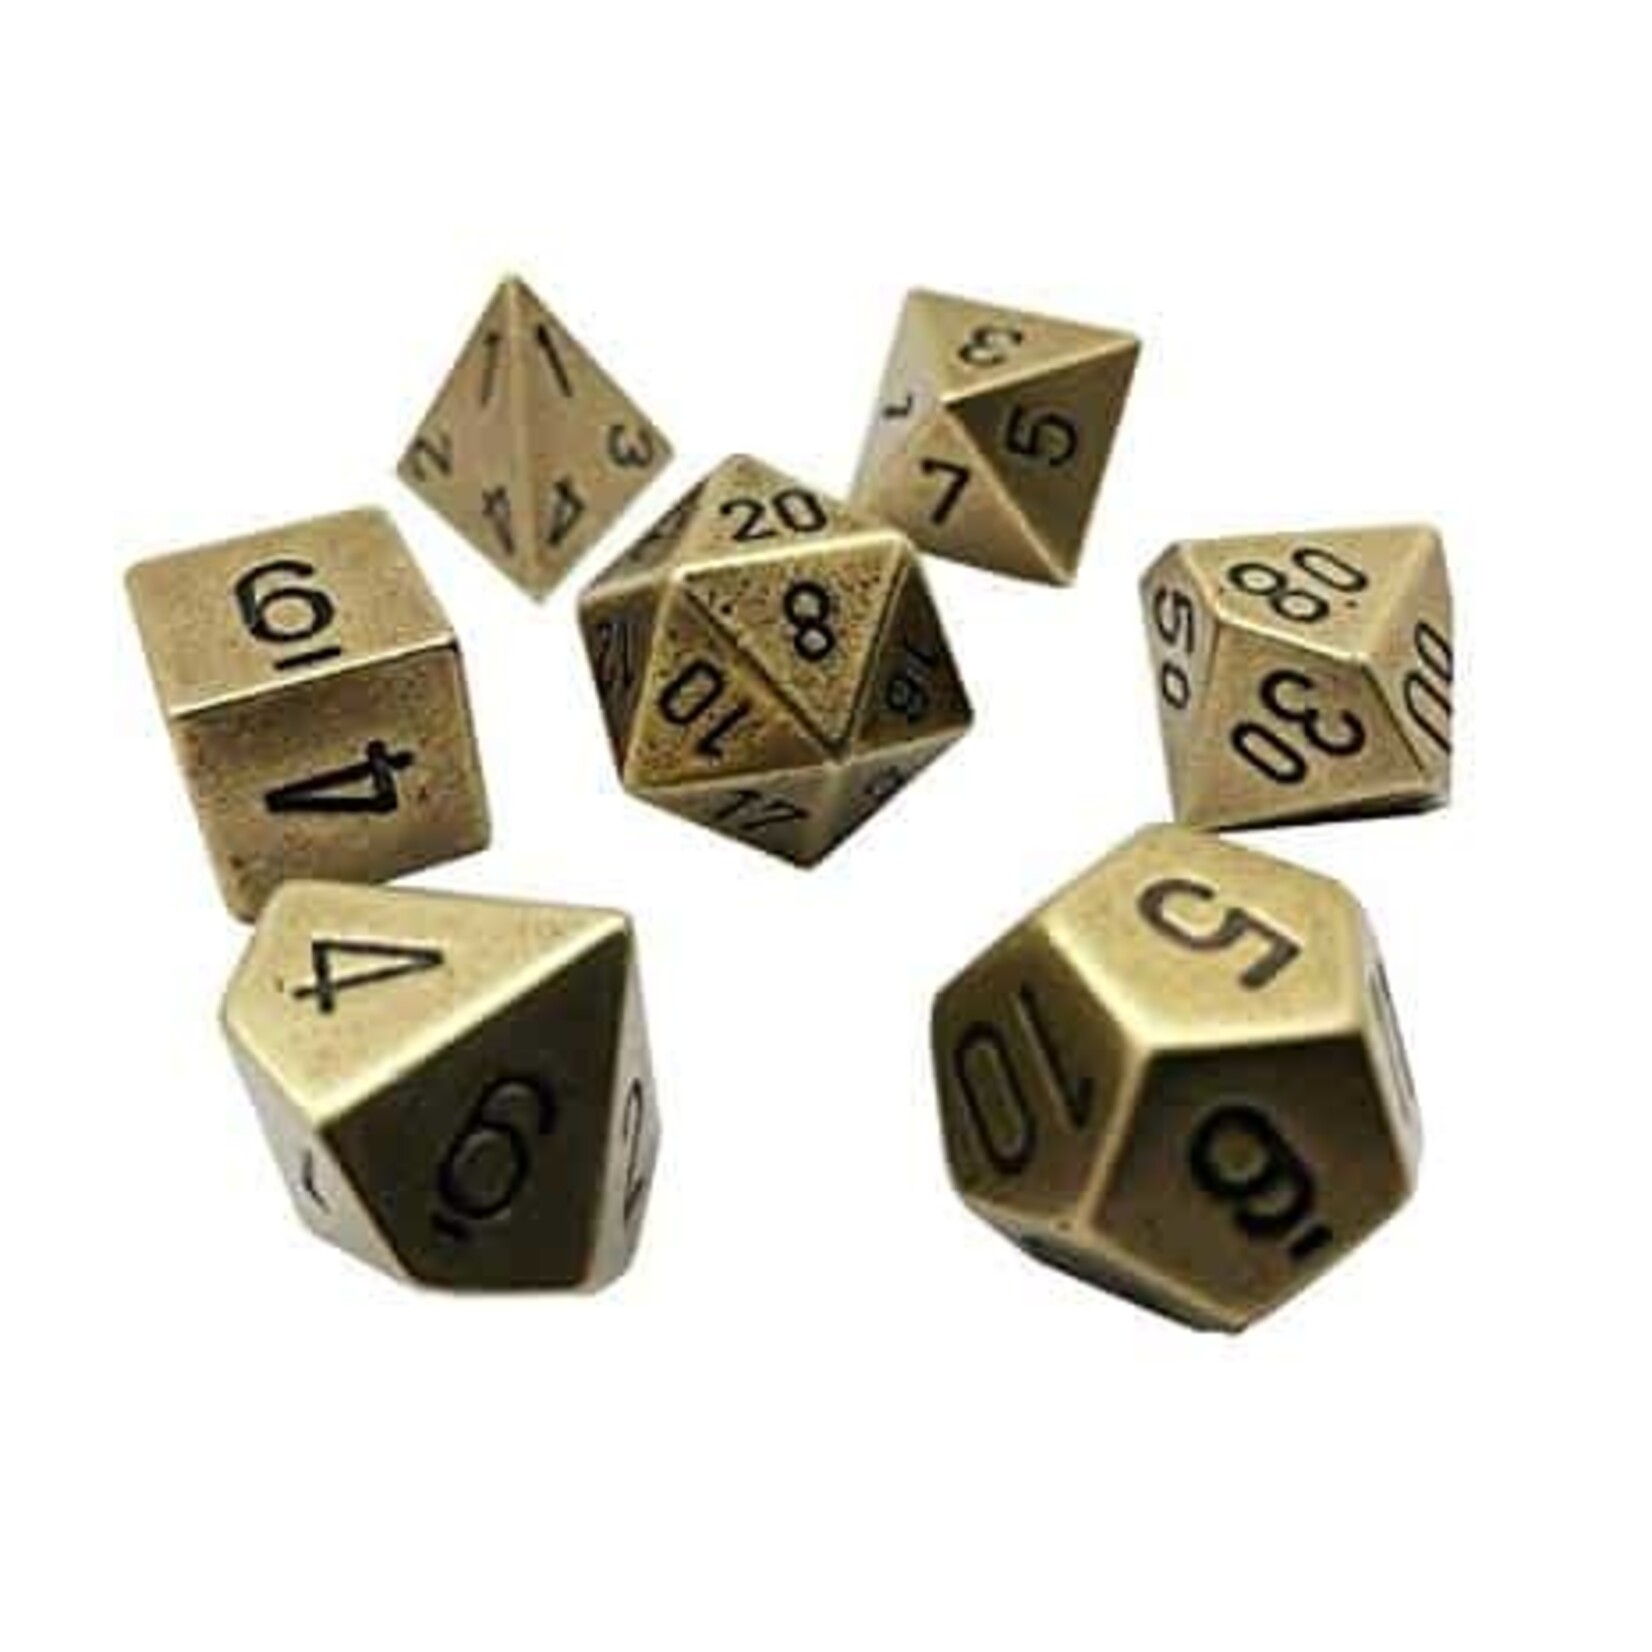 Chessex Metal Poly (7) Old Brass